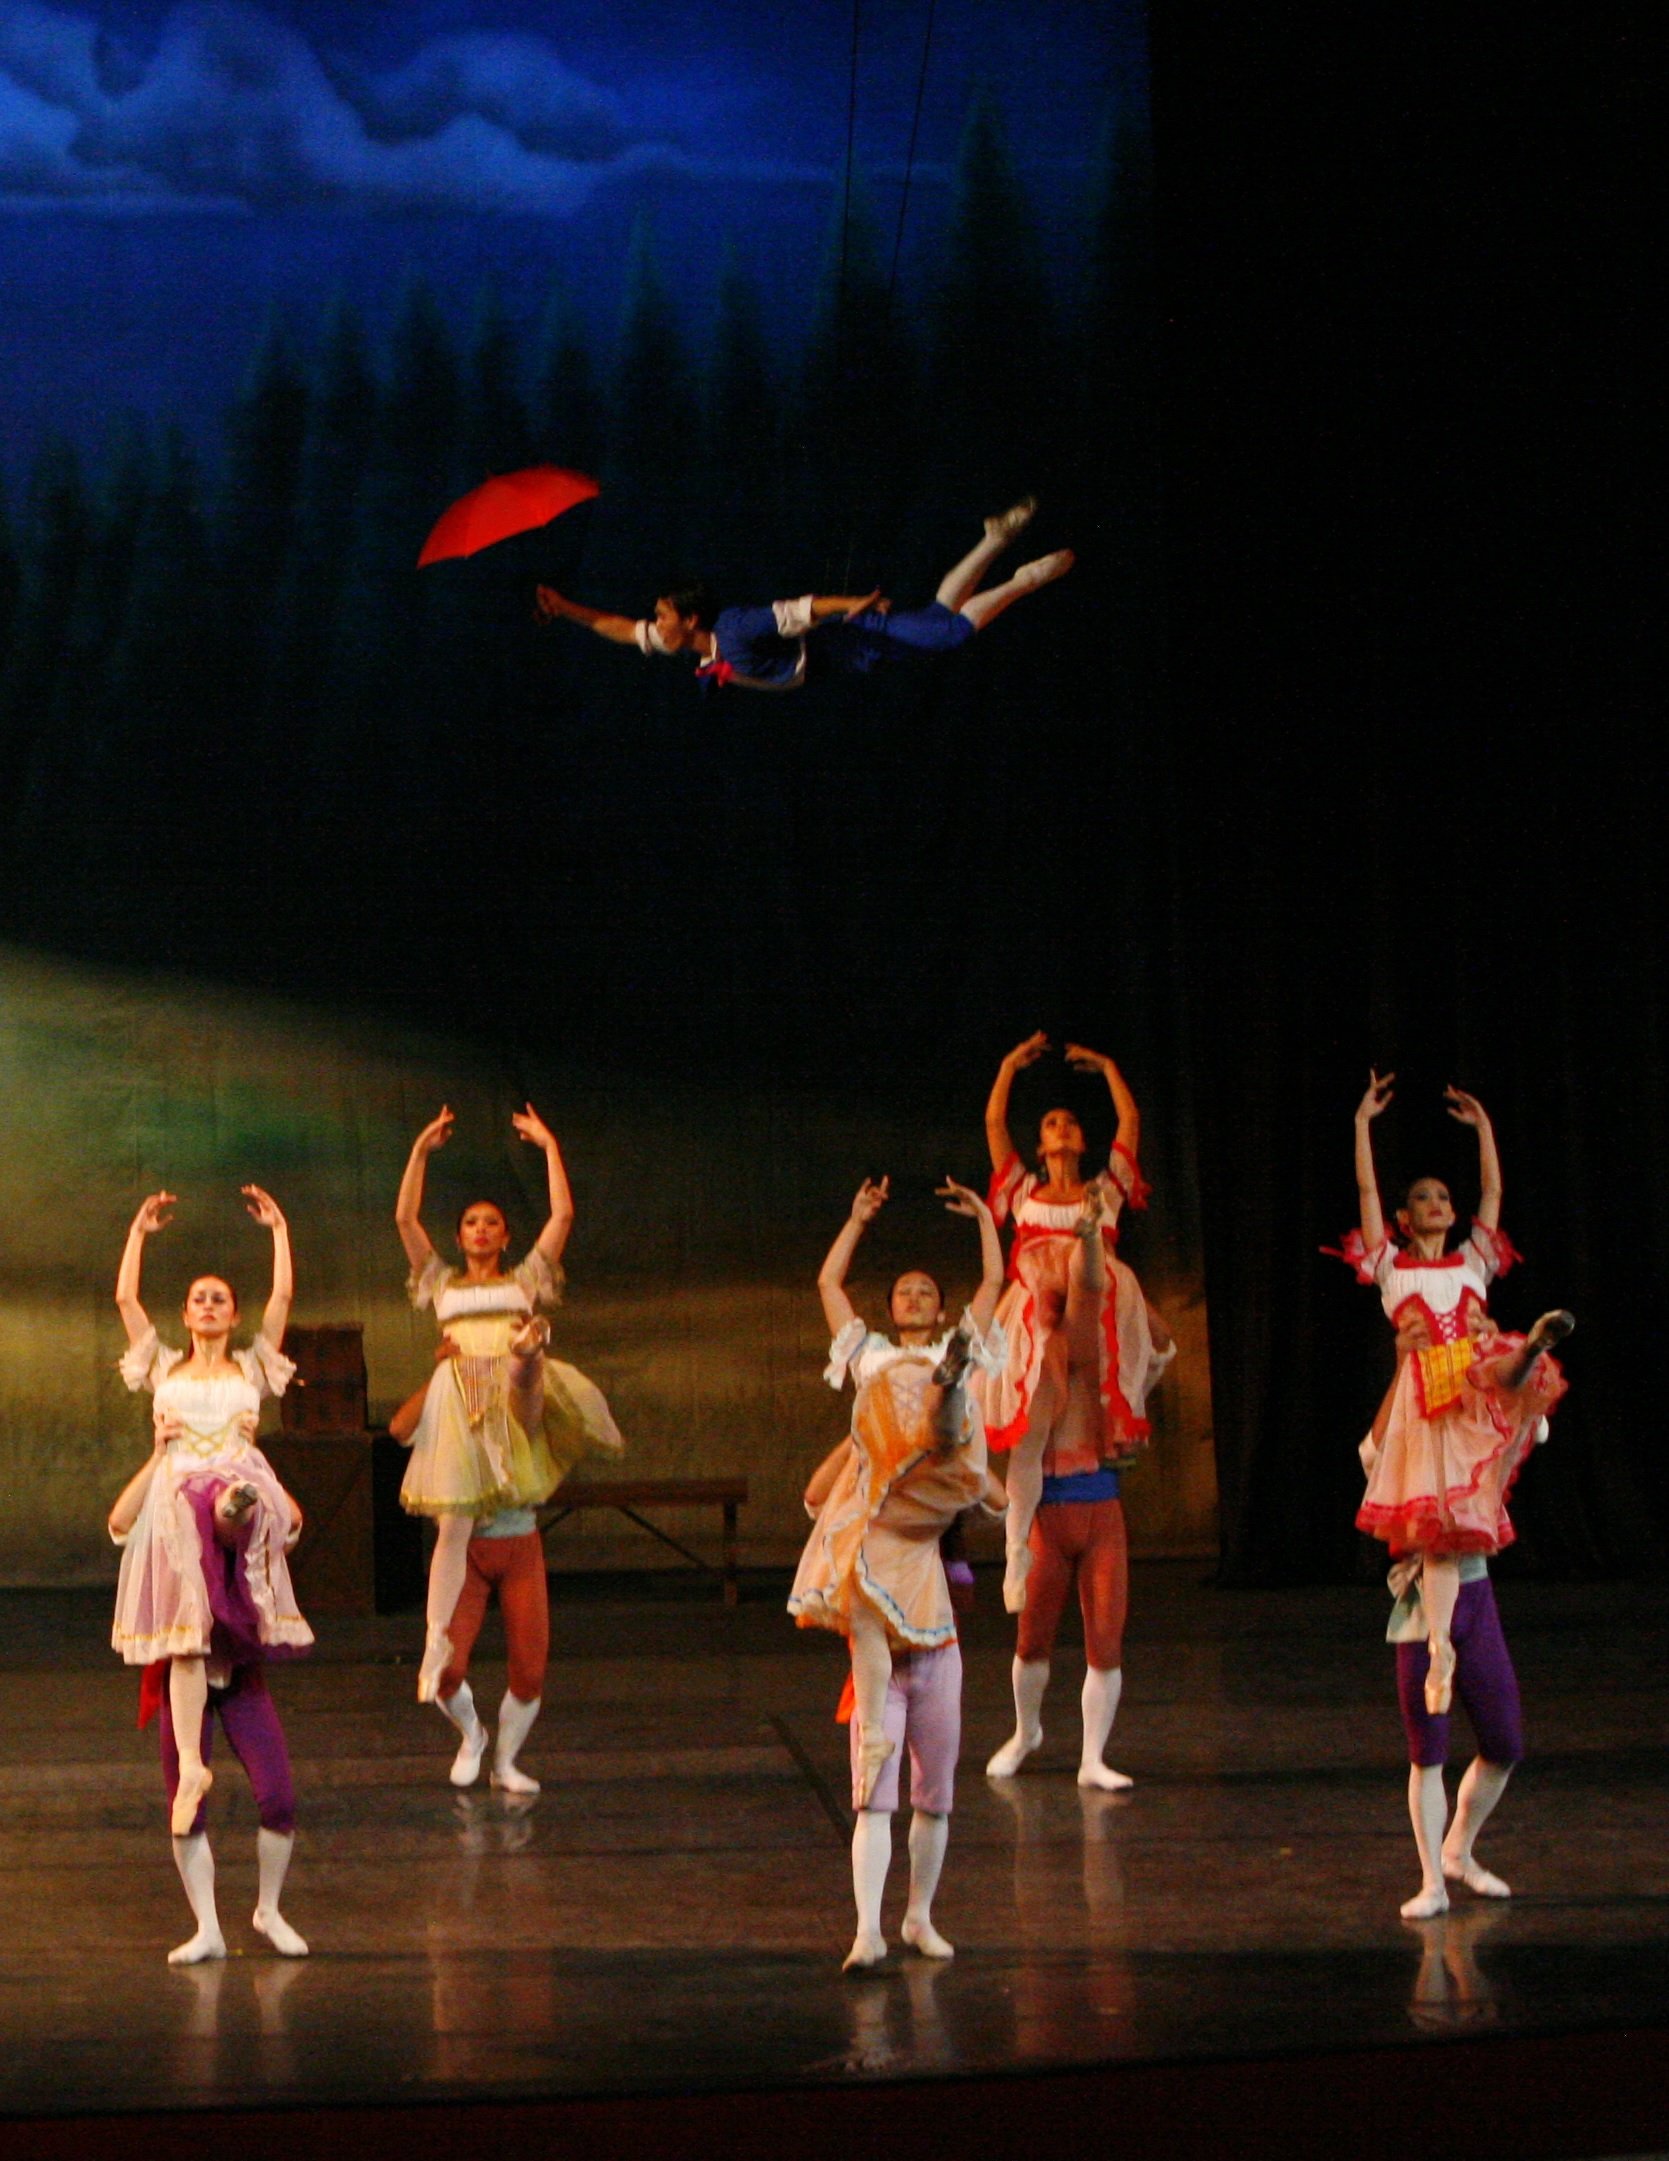    A version of  La Fille Mal Gardee (The Naughty Daughter)  was choreographed for Ballet Manila by People’s Artist of Russia Sergey Vikulov in 2005. Set in the English countryside, it tells the story of Lise whose mother, Simone, is opposed to her c